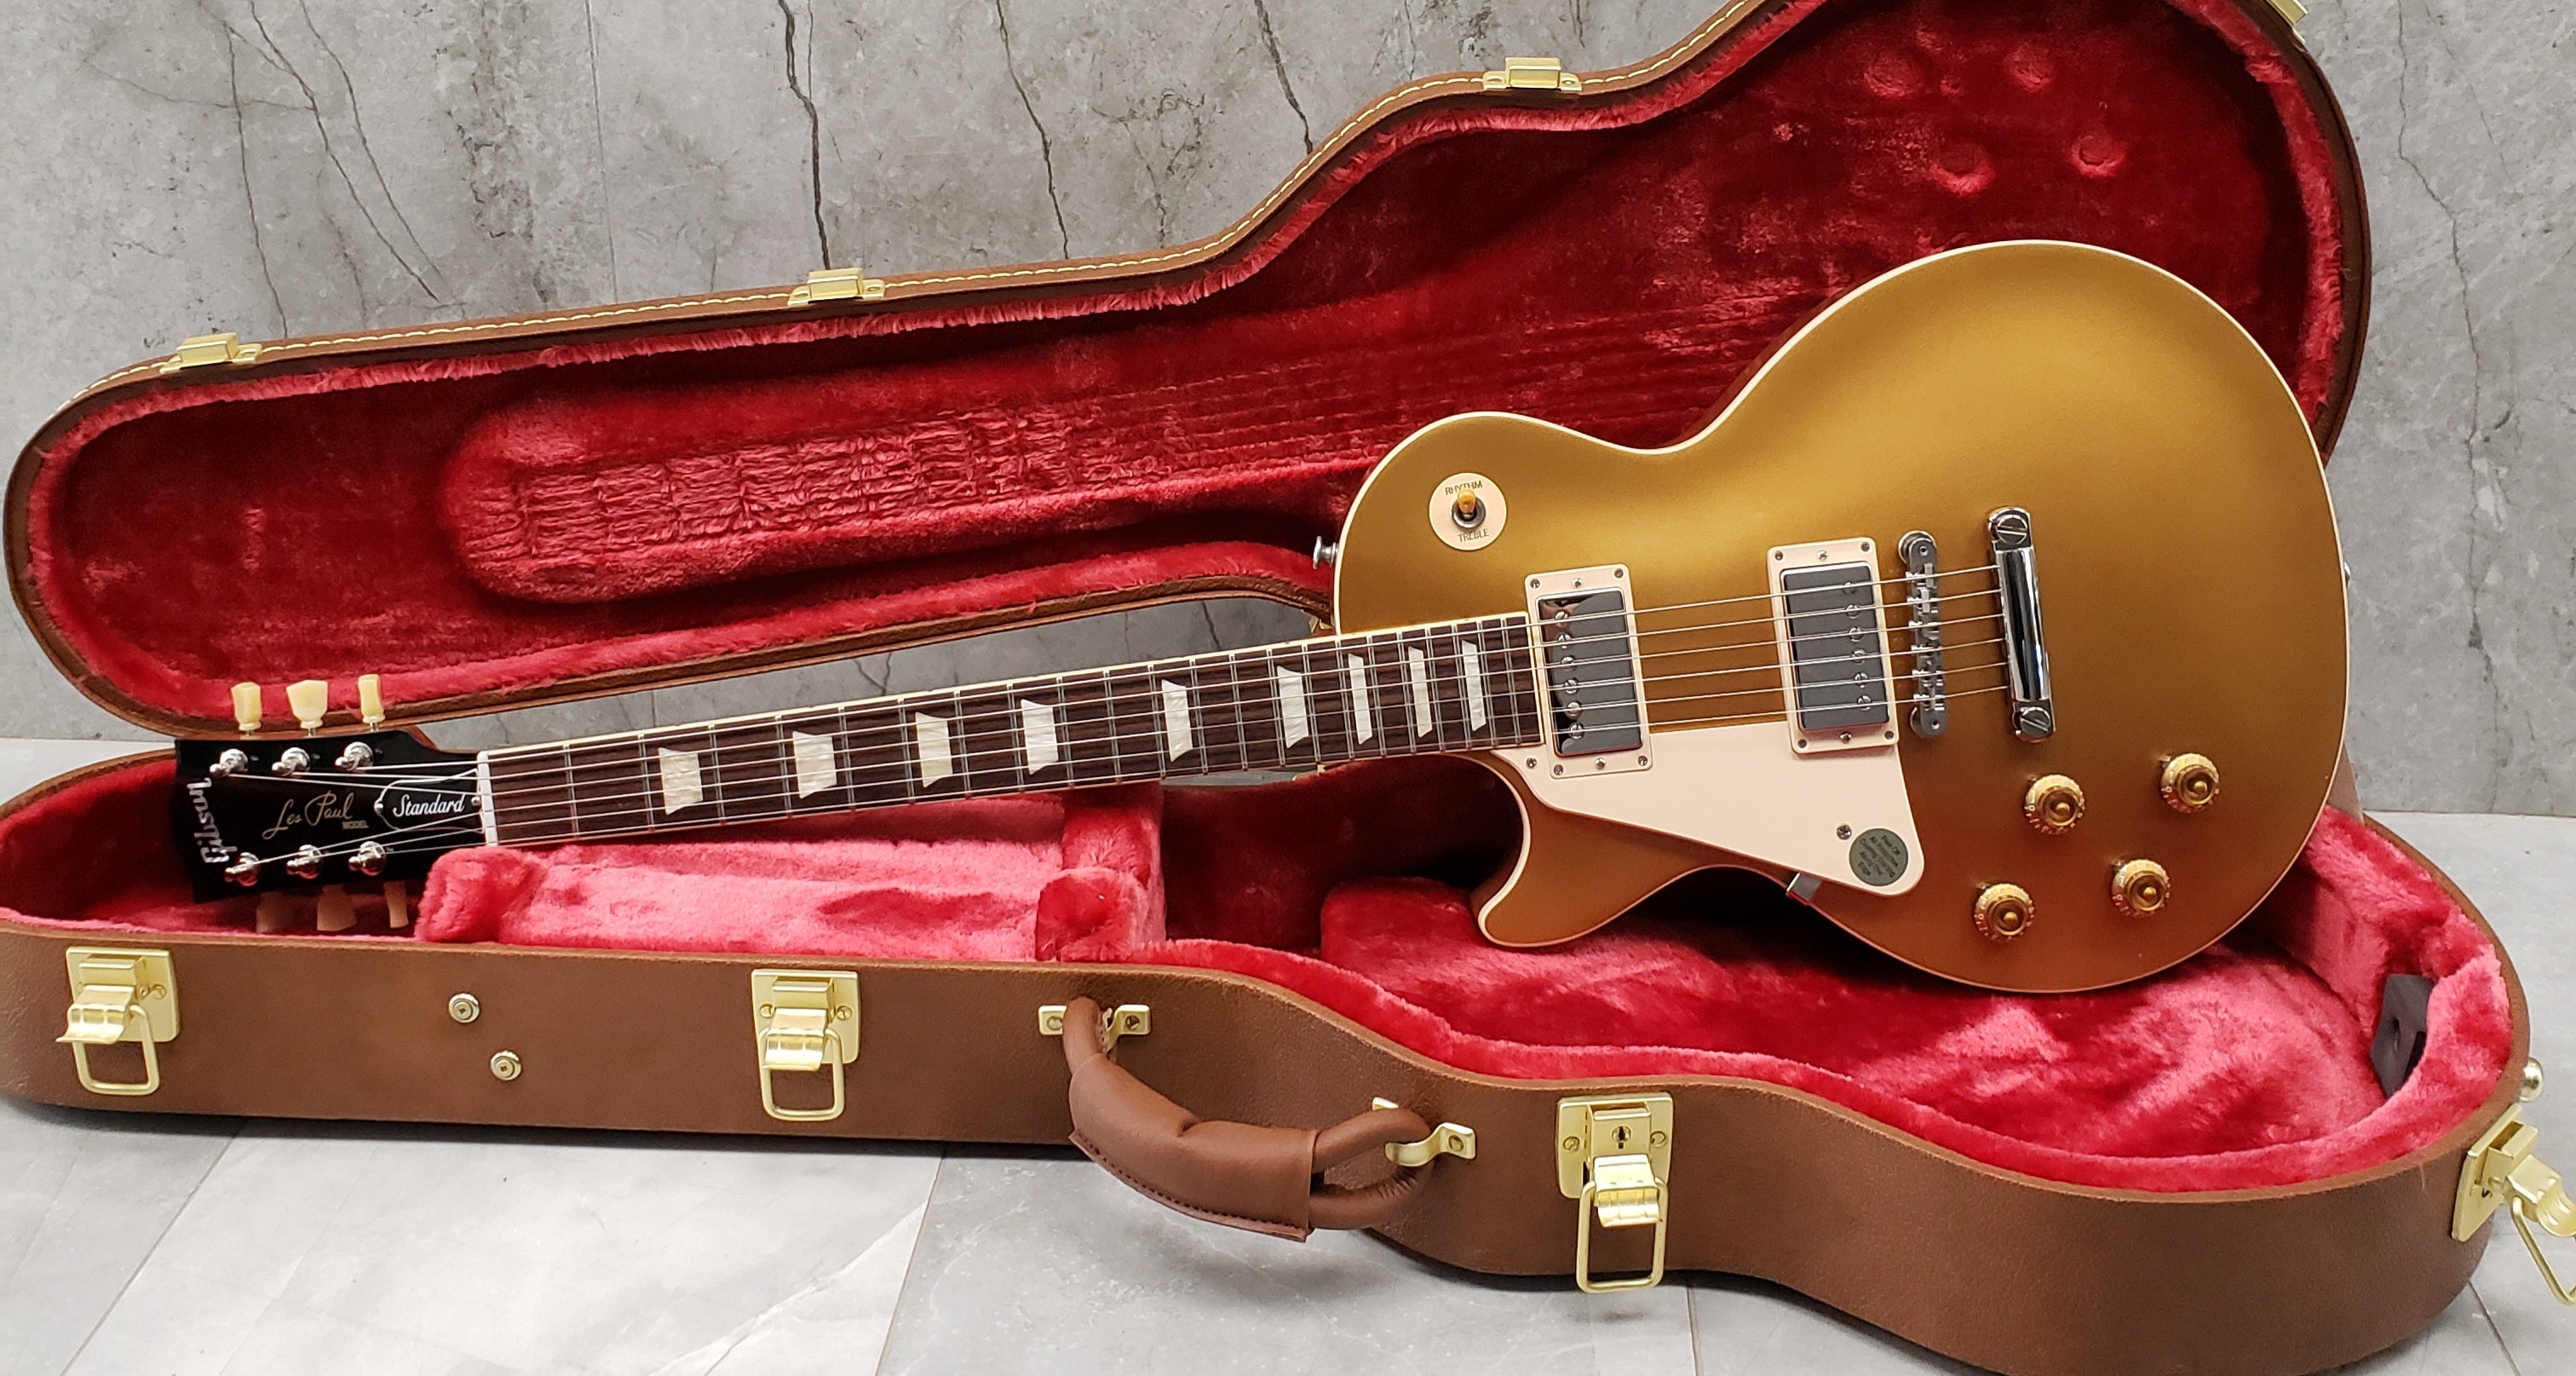 Gibson Les Paul Standard 50s Left Handed - Gold Top LPS5P00GTNHLH SERIAL NUMBER 208920024 - 10.4 LBS